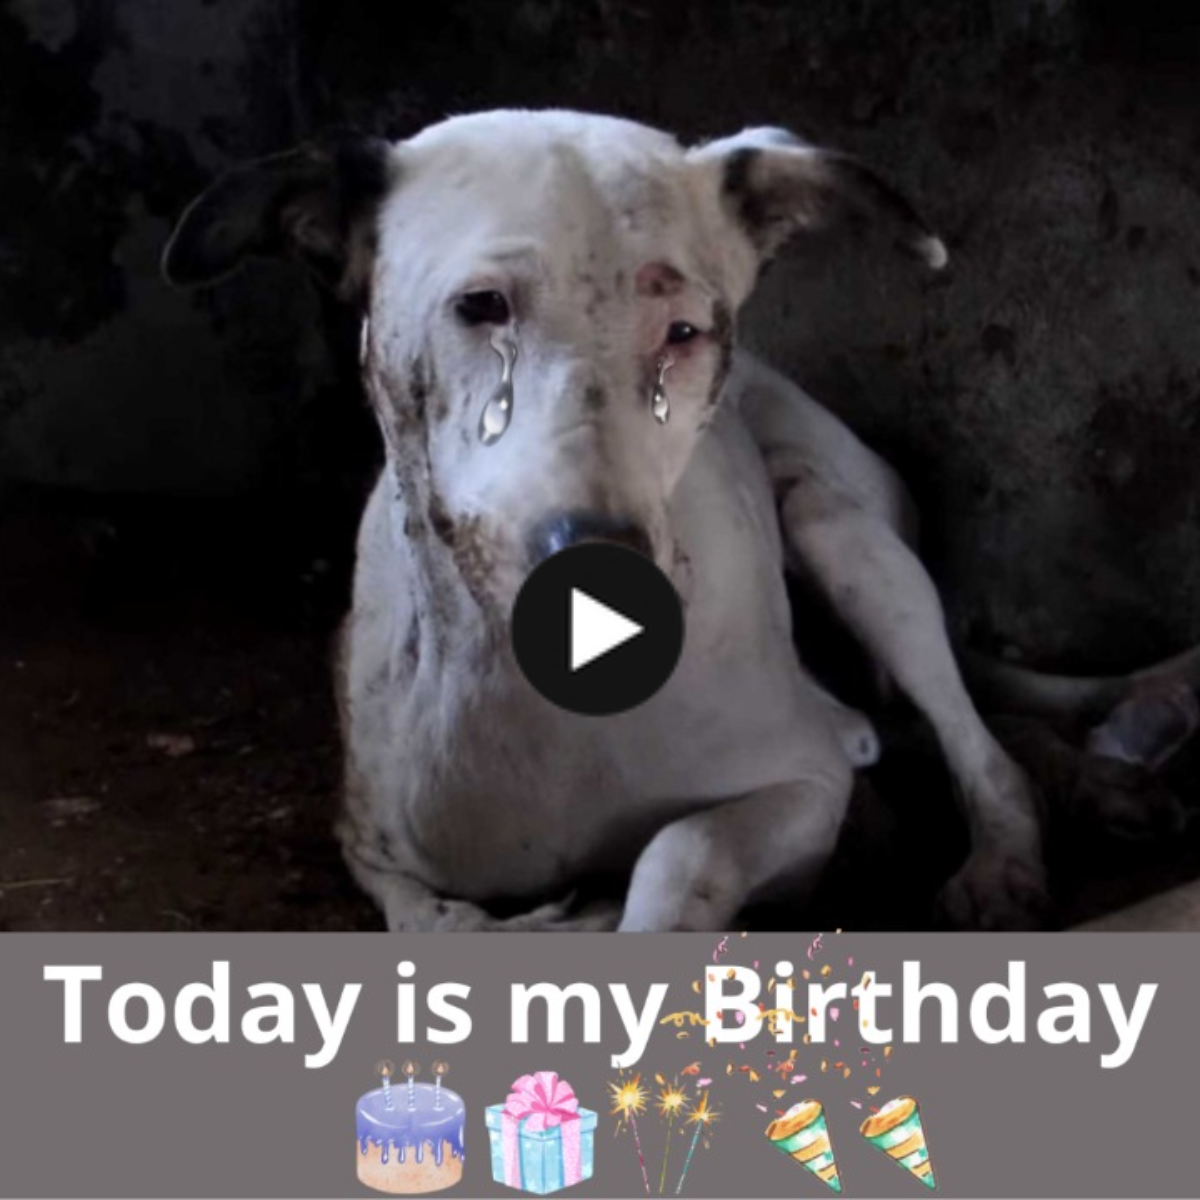 Adorable story about a dog’s birthday: After suffering so much, this poor dog hopes to receive a special gift of one million likes on his special day.